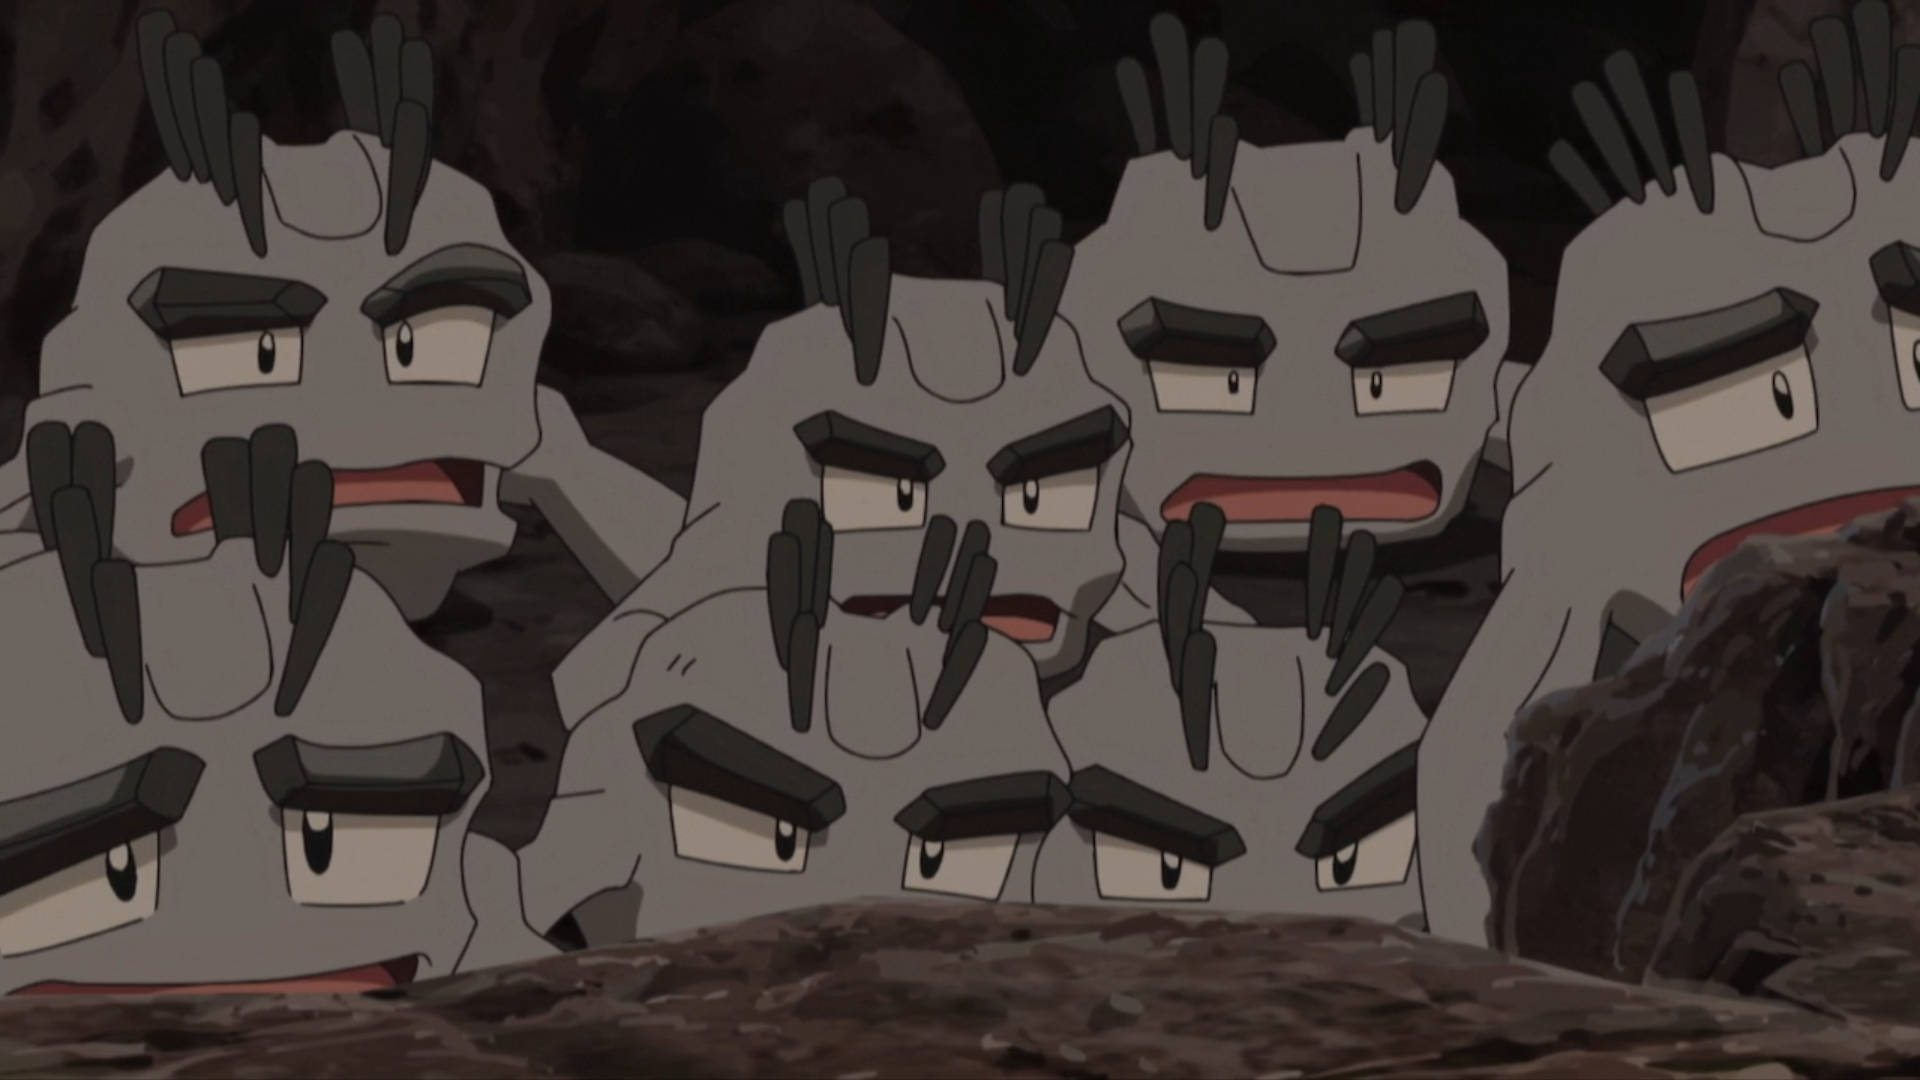 Seven Geodude Pokemon With Surprised Expressions Wallpaper